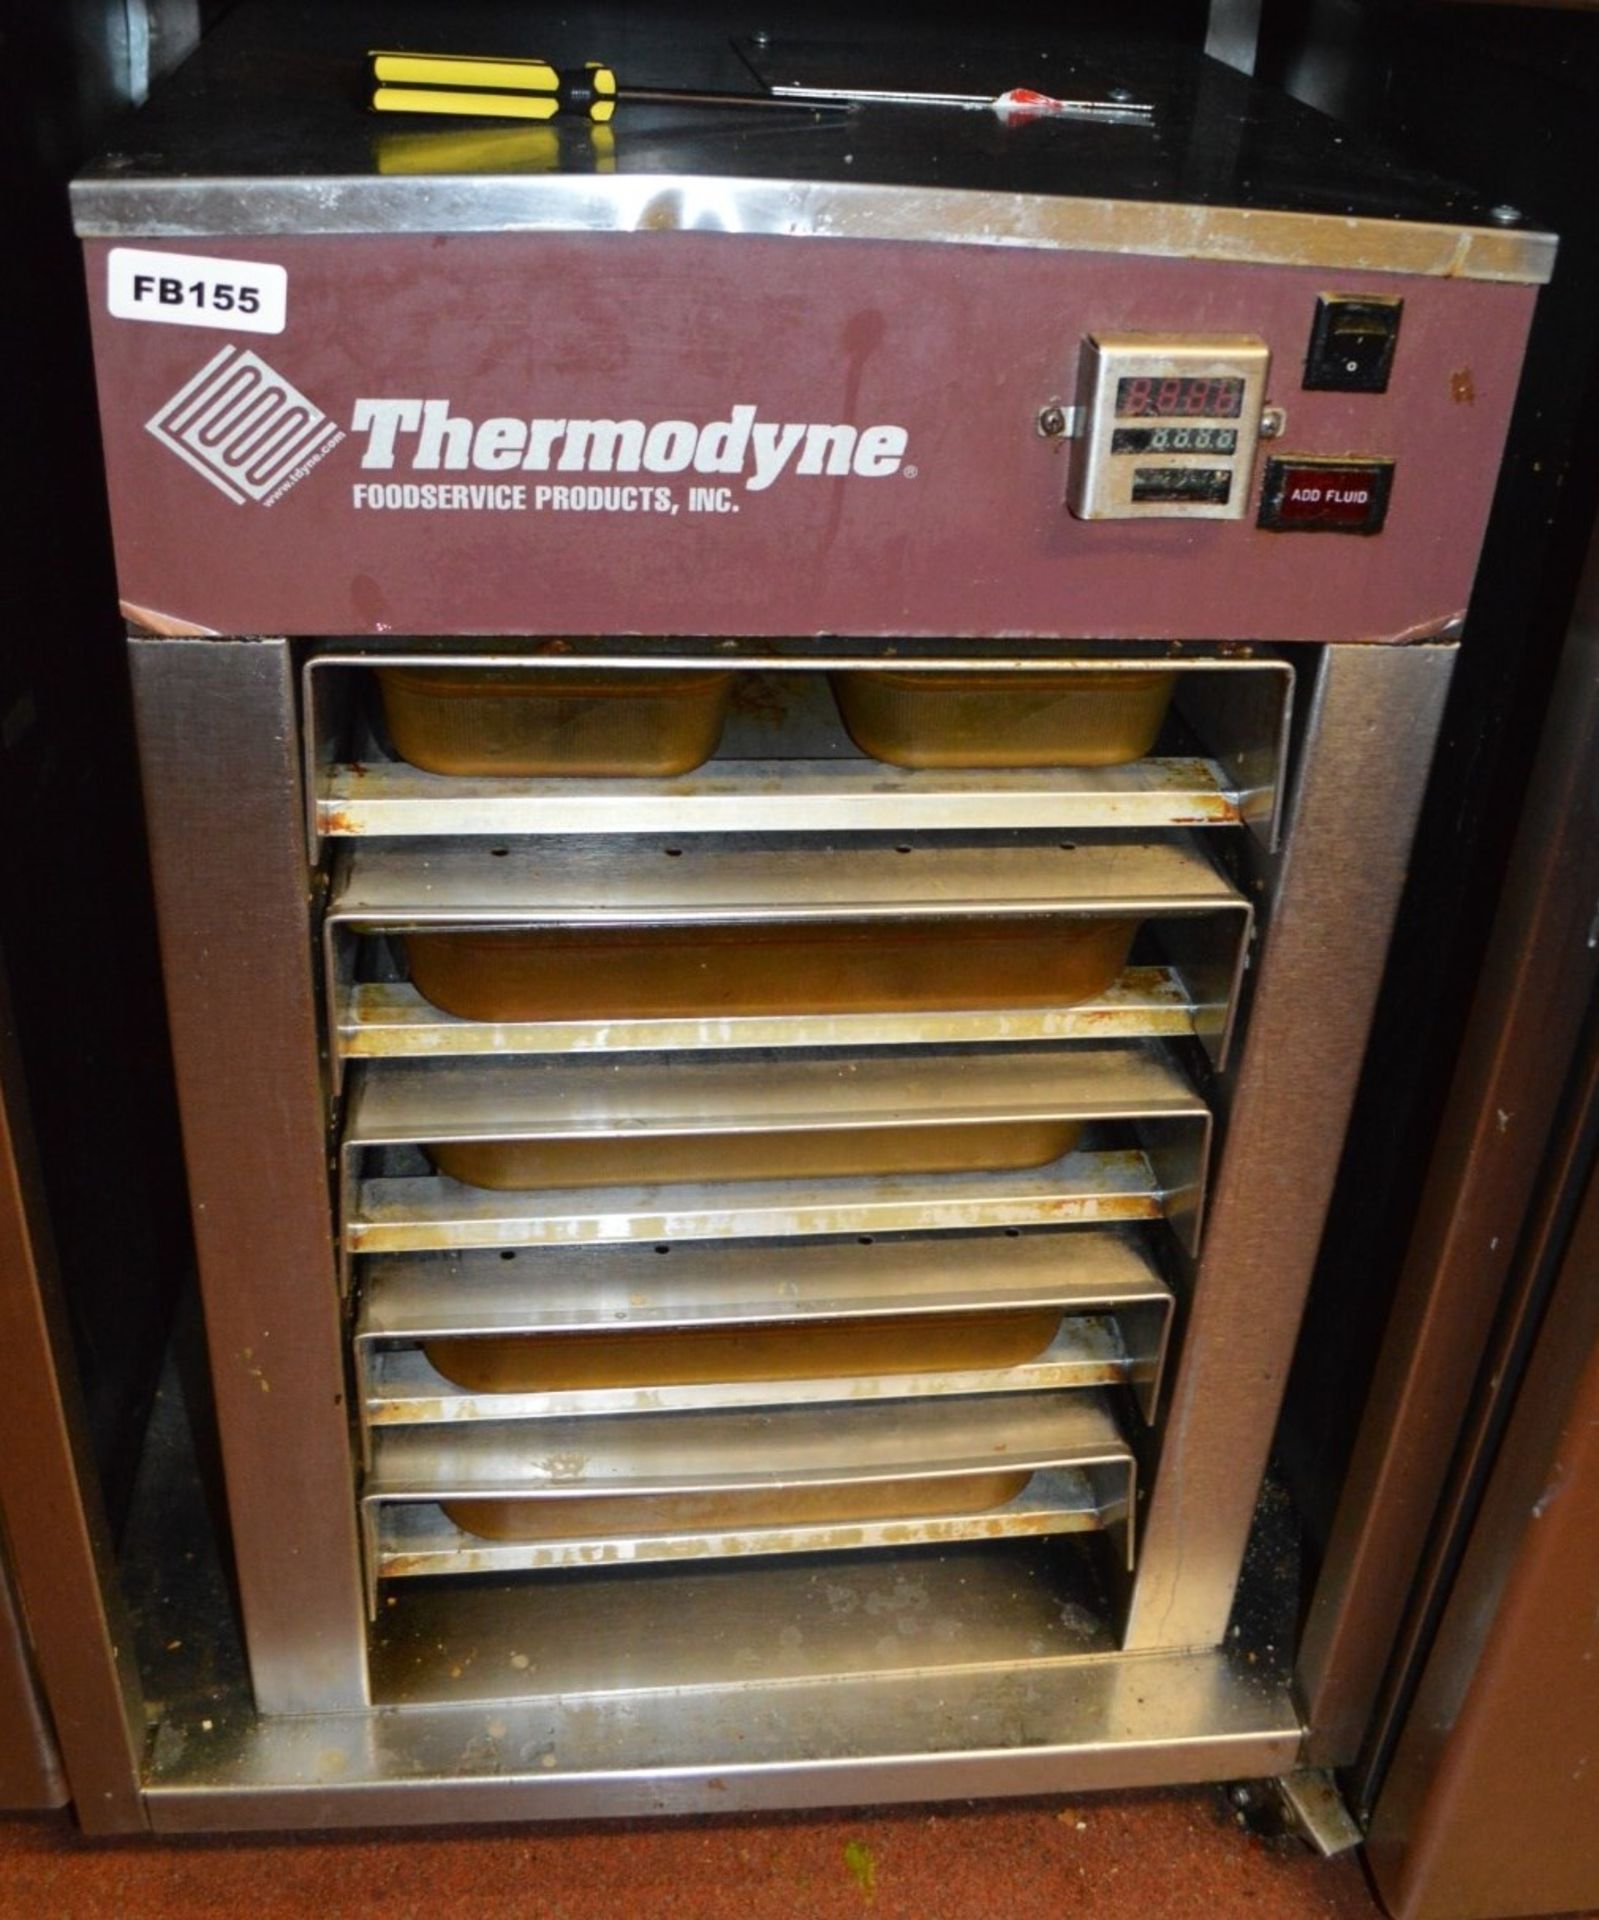 1 x Thermodyne Cook and Hold Food Warmer - H77 x W50 x D66 cms - Ref FB155 - CL357 - Location: